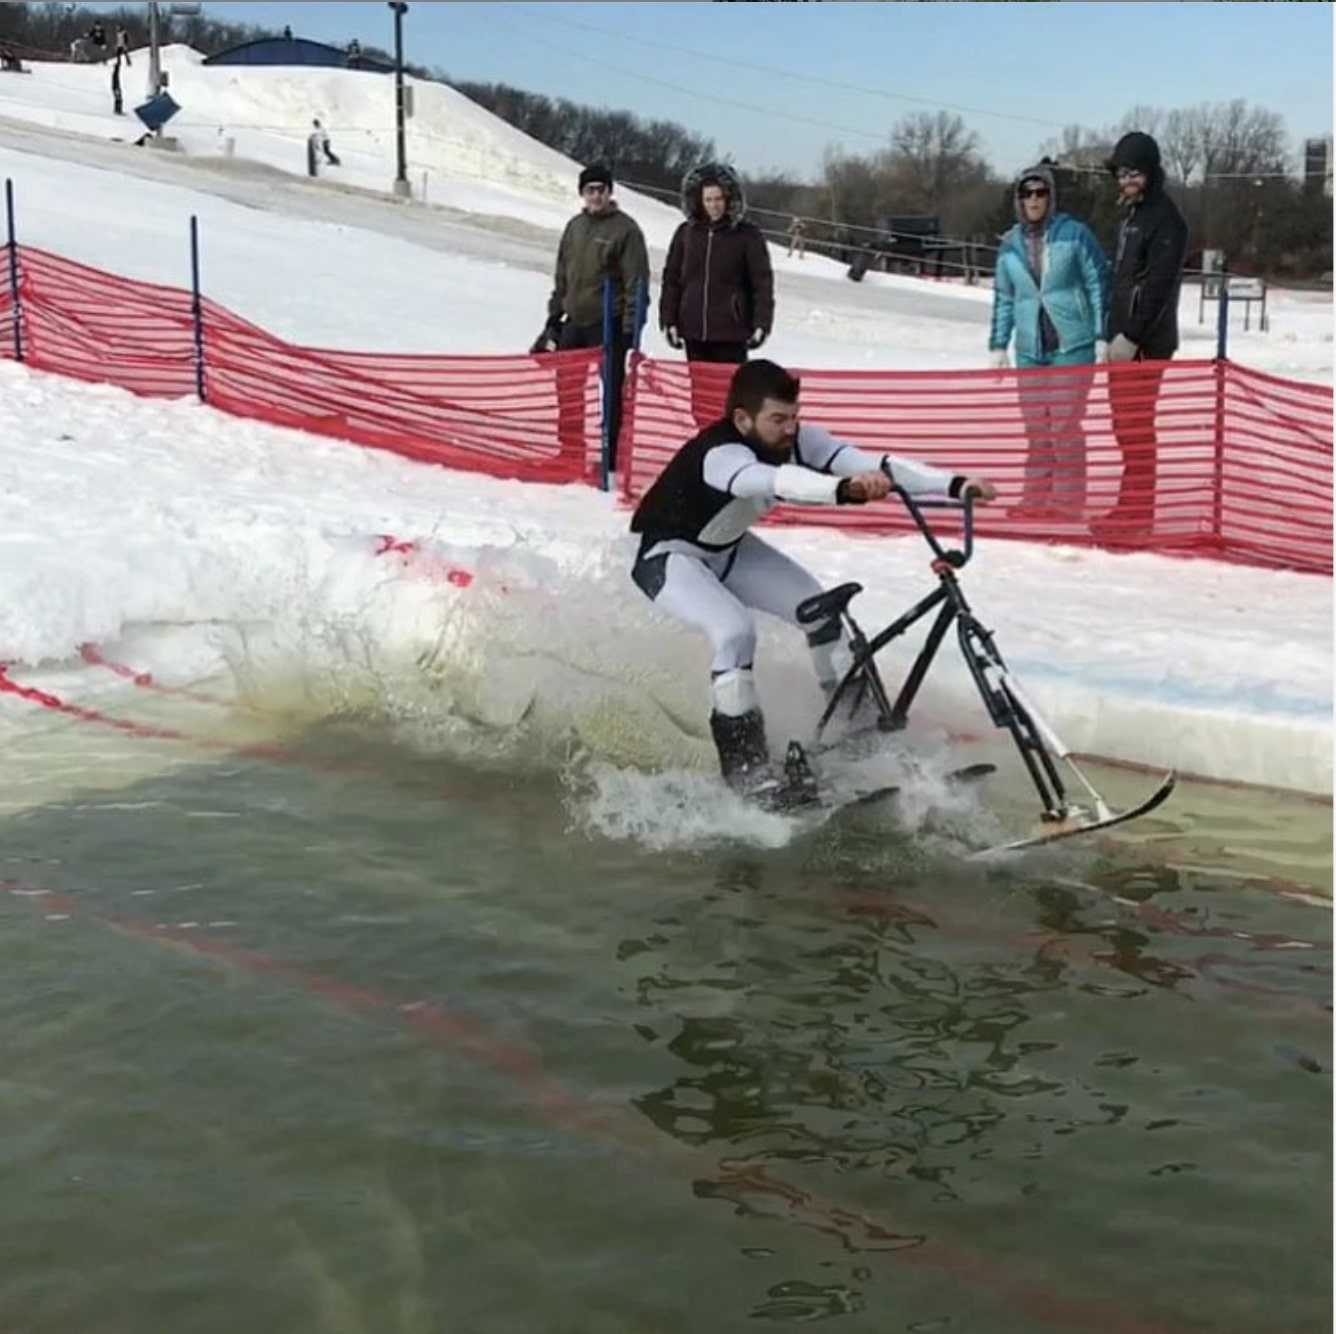 Person rides a bike with skis over a water hole in the snow at ski hill with spectators and a snow fence in background 